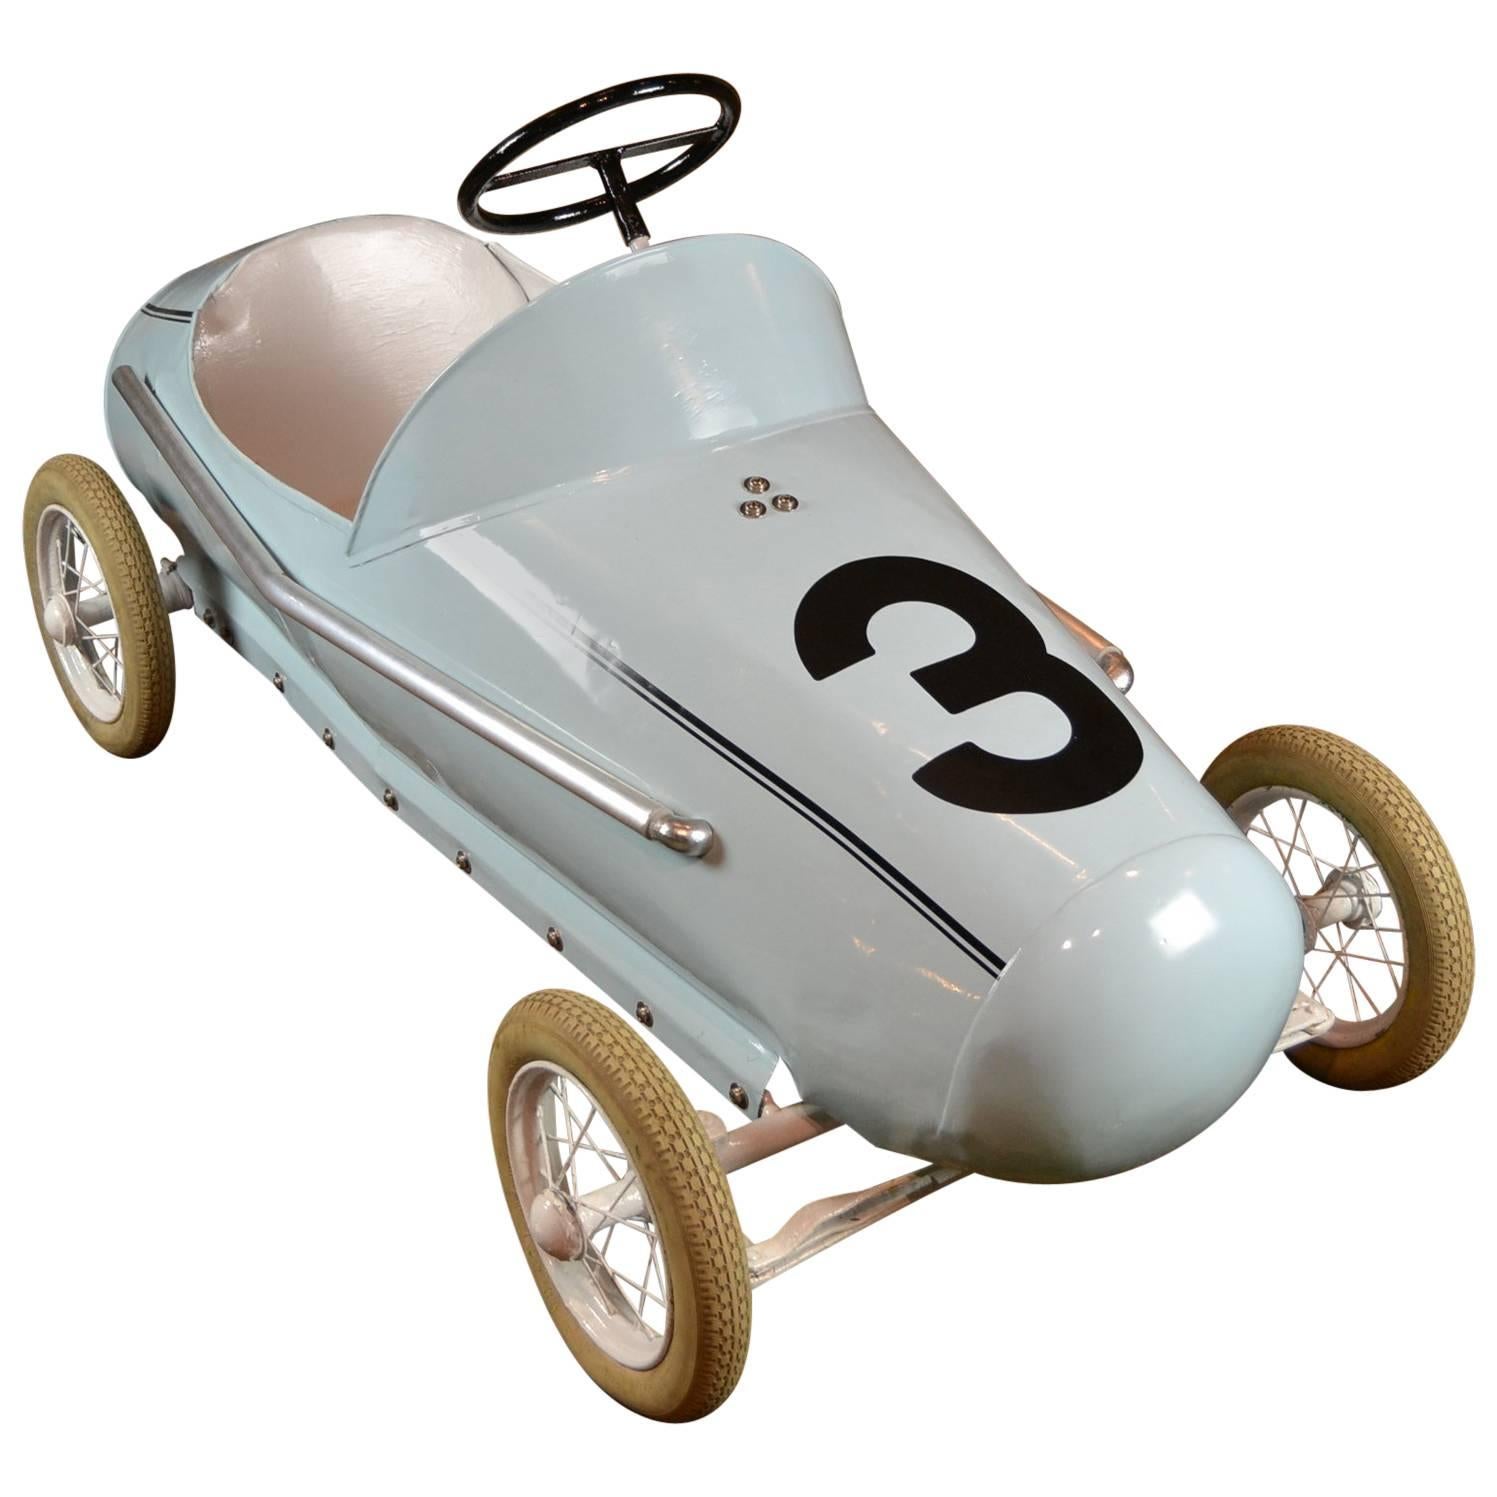 Exceptional Big Racer Pedal Car